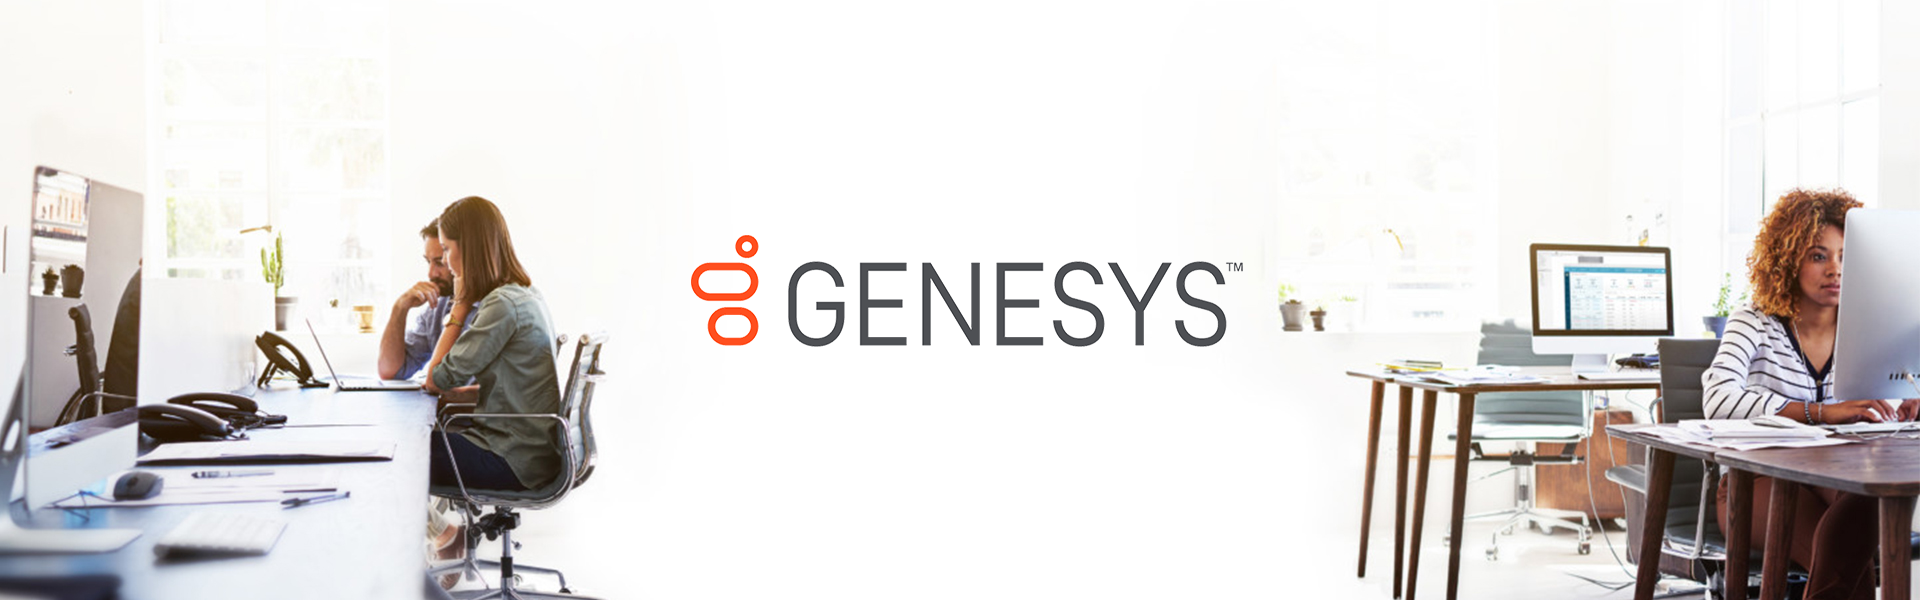 Review Genesys PureCloud: All-in-one cloud contact center solution - Appvizer